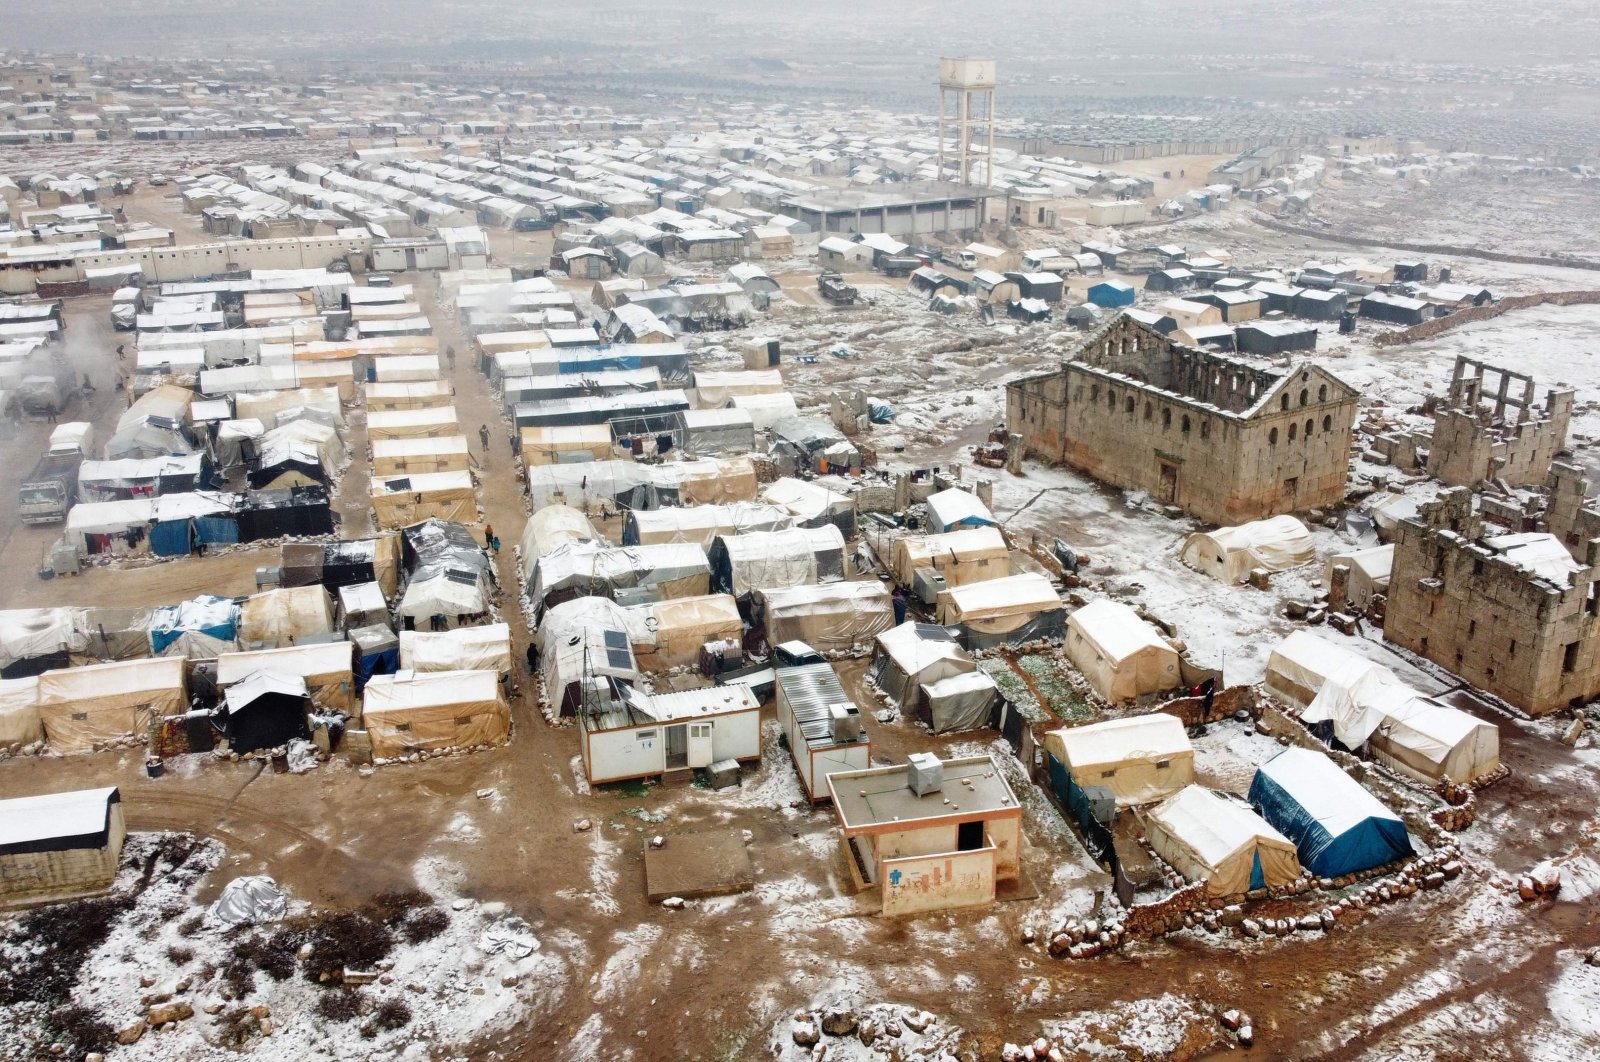 Tents and historical ruins are covered in snow at a camp for internally displaced Syrians, near the town of Kafr Lusin by the border with Turkey, in the opposition-held northwestern province of Idlib, Jan. 23, 2022. (AFP Photo)